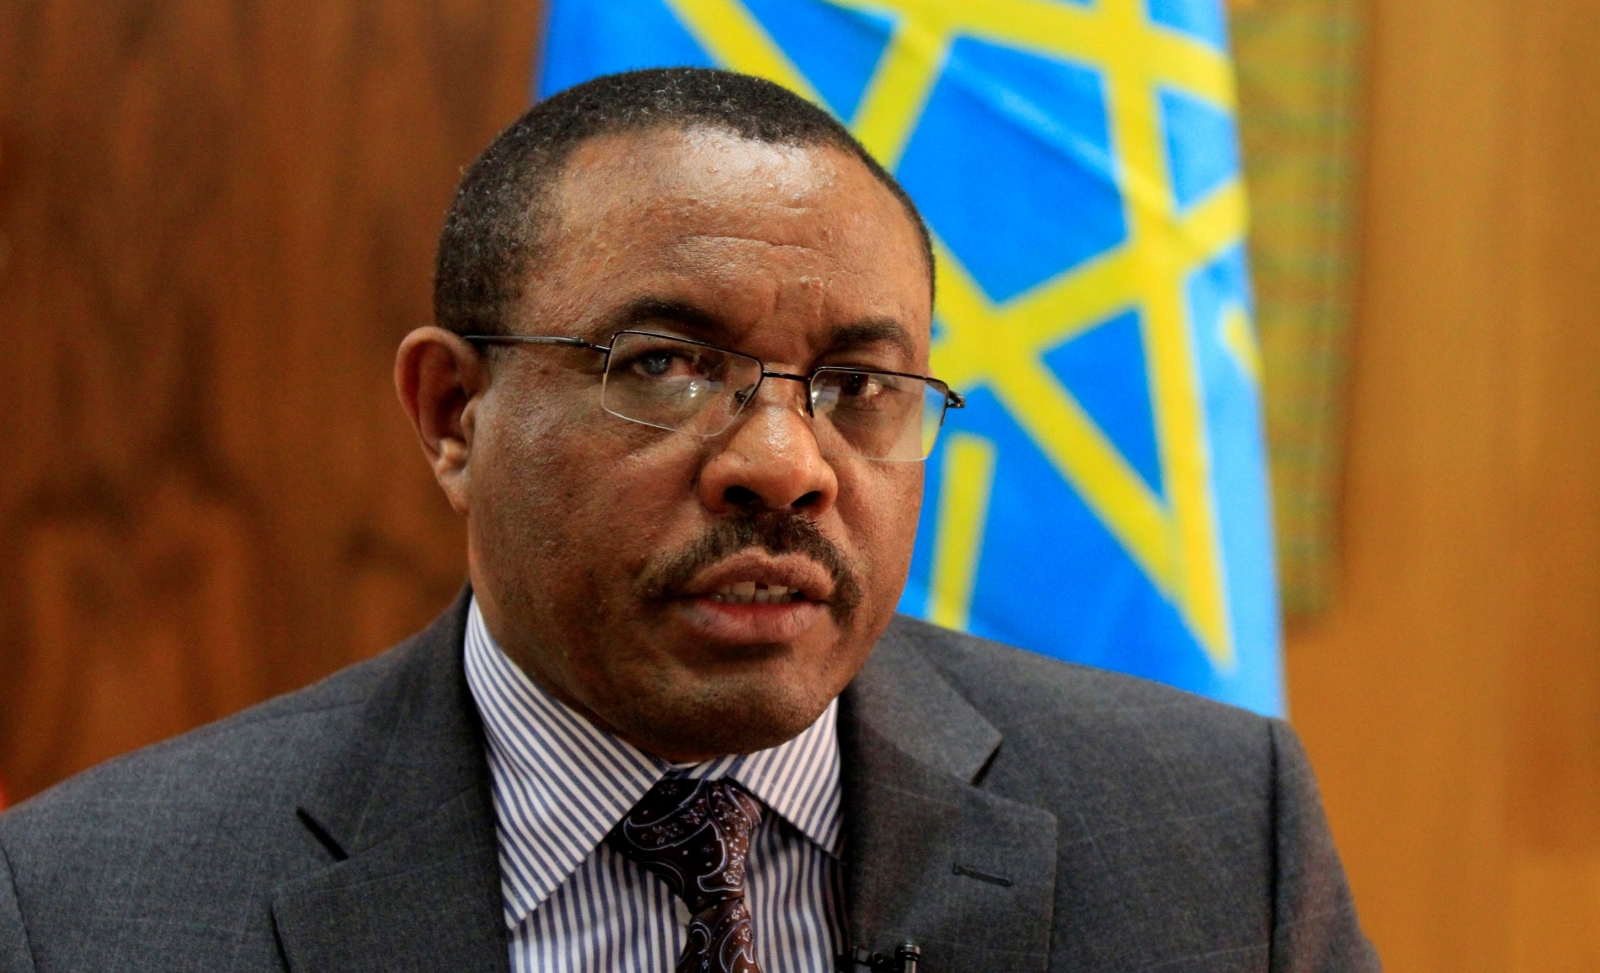 Where is Ethiopia heading after Prime Minister Hailemariam Desalegn's